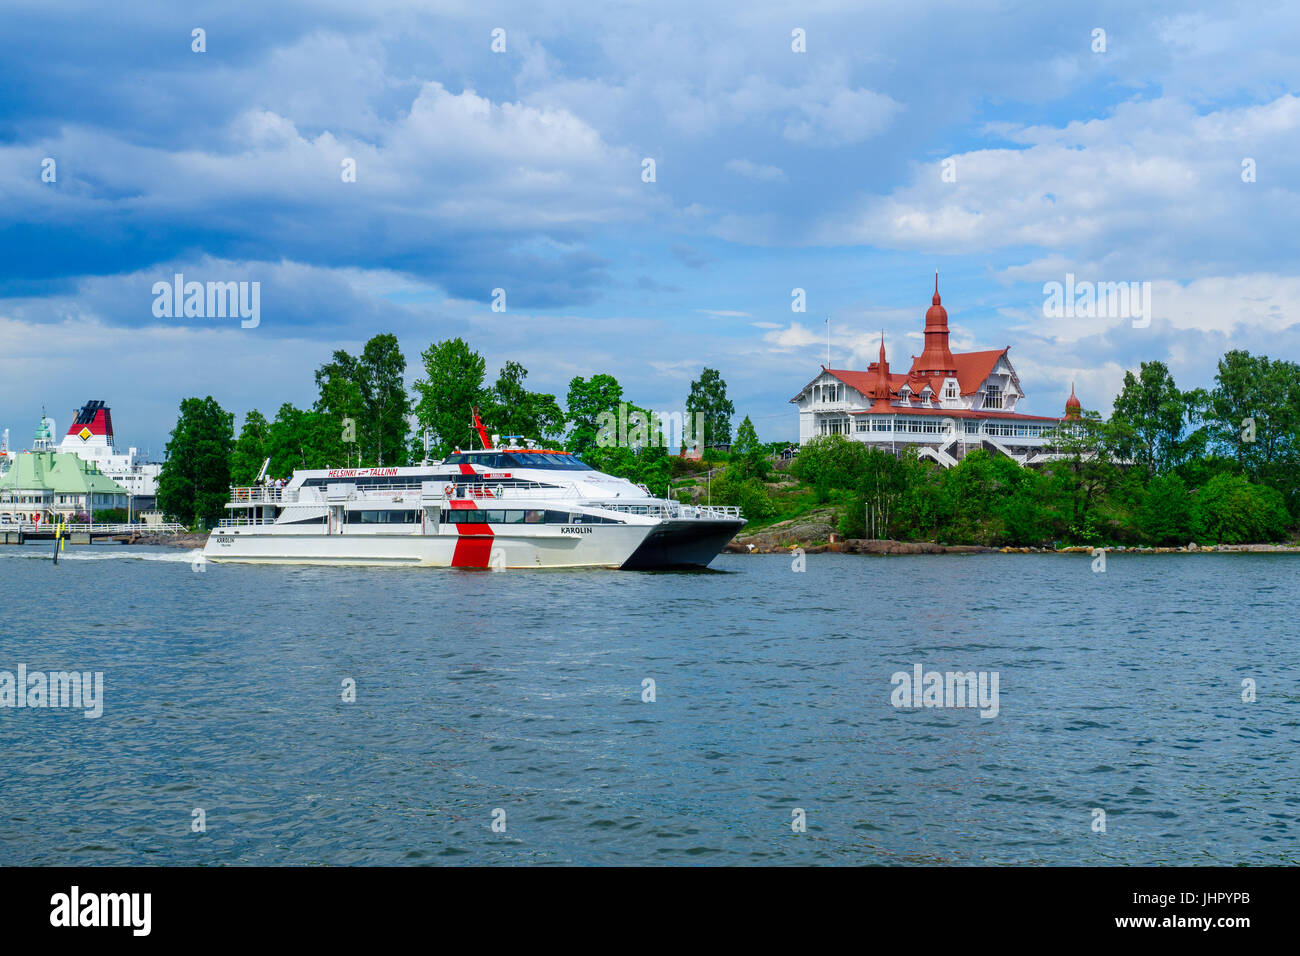 HELSINKI, FINLAND - JUNE 16, 2017: View of the Luoto island, and ferry boats, in Helsinki, Finland Stock Photo